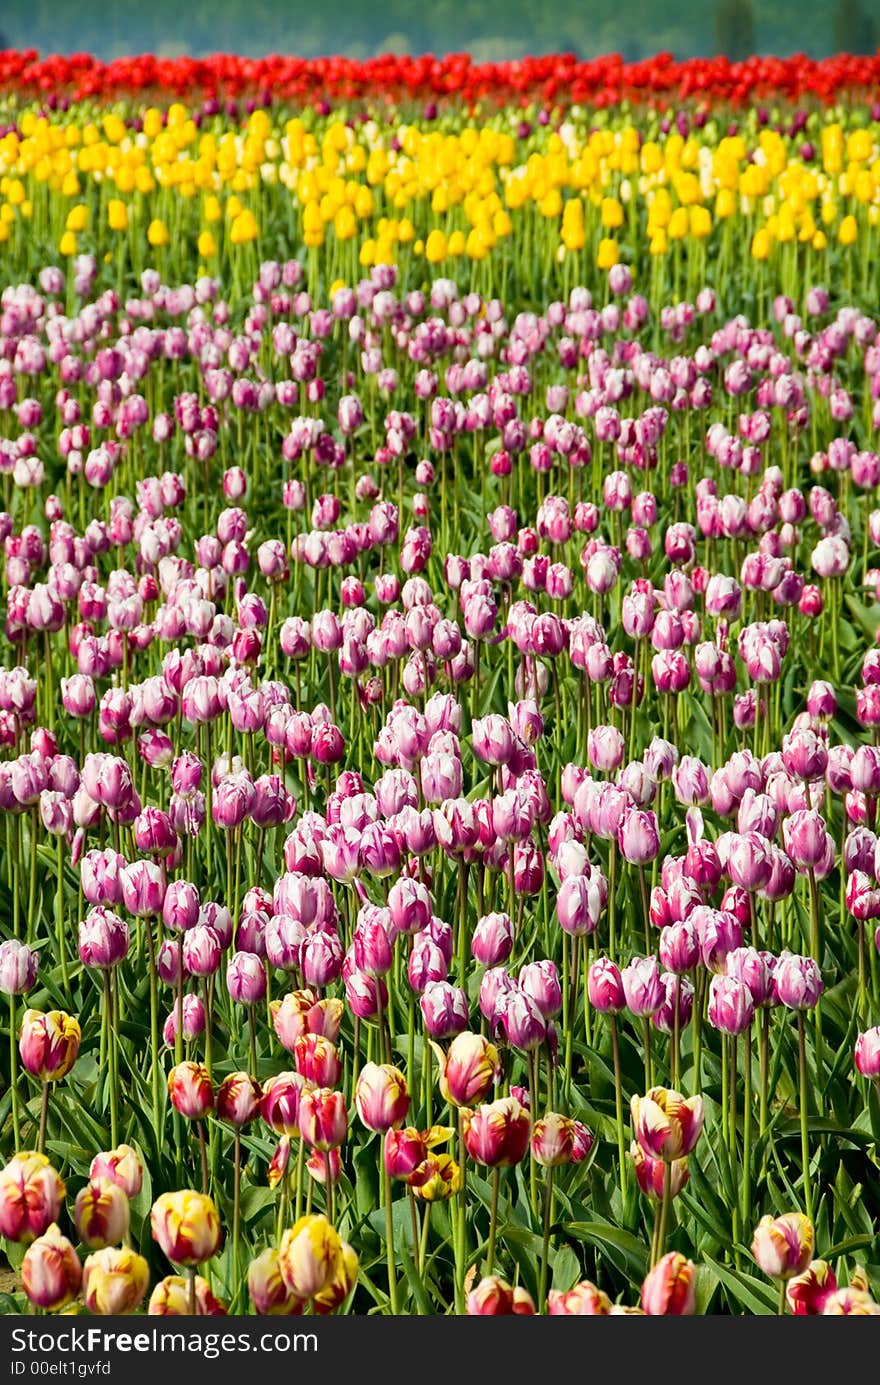 Sun drenched mixed tulip field in Skagit Valley, Wa. Sun drenched mixed tulip field in Skagit Valley, Wa